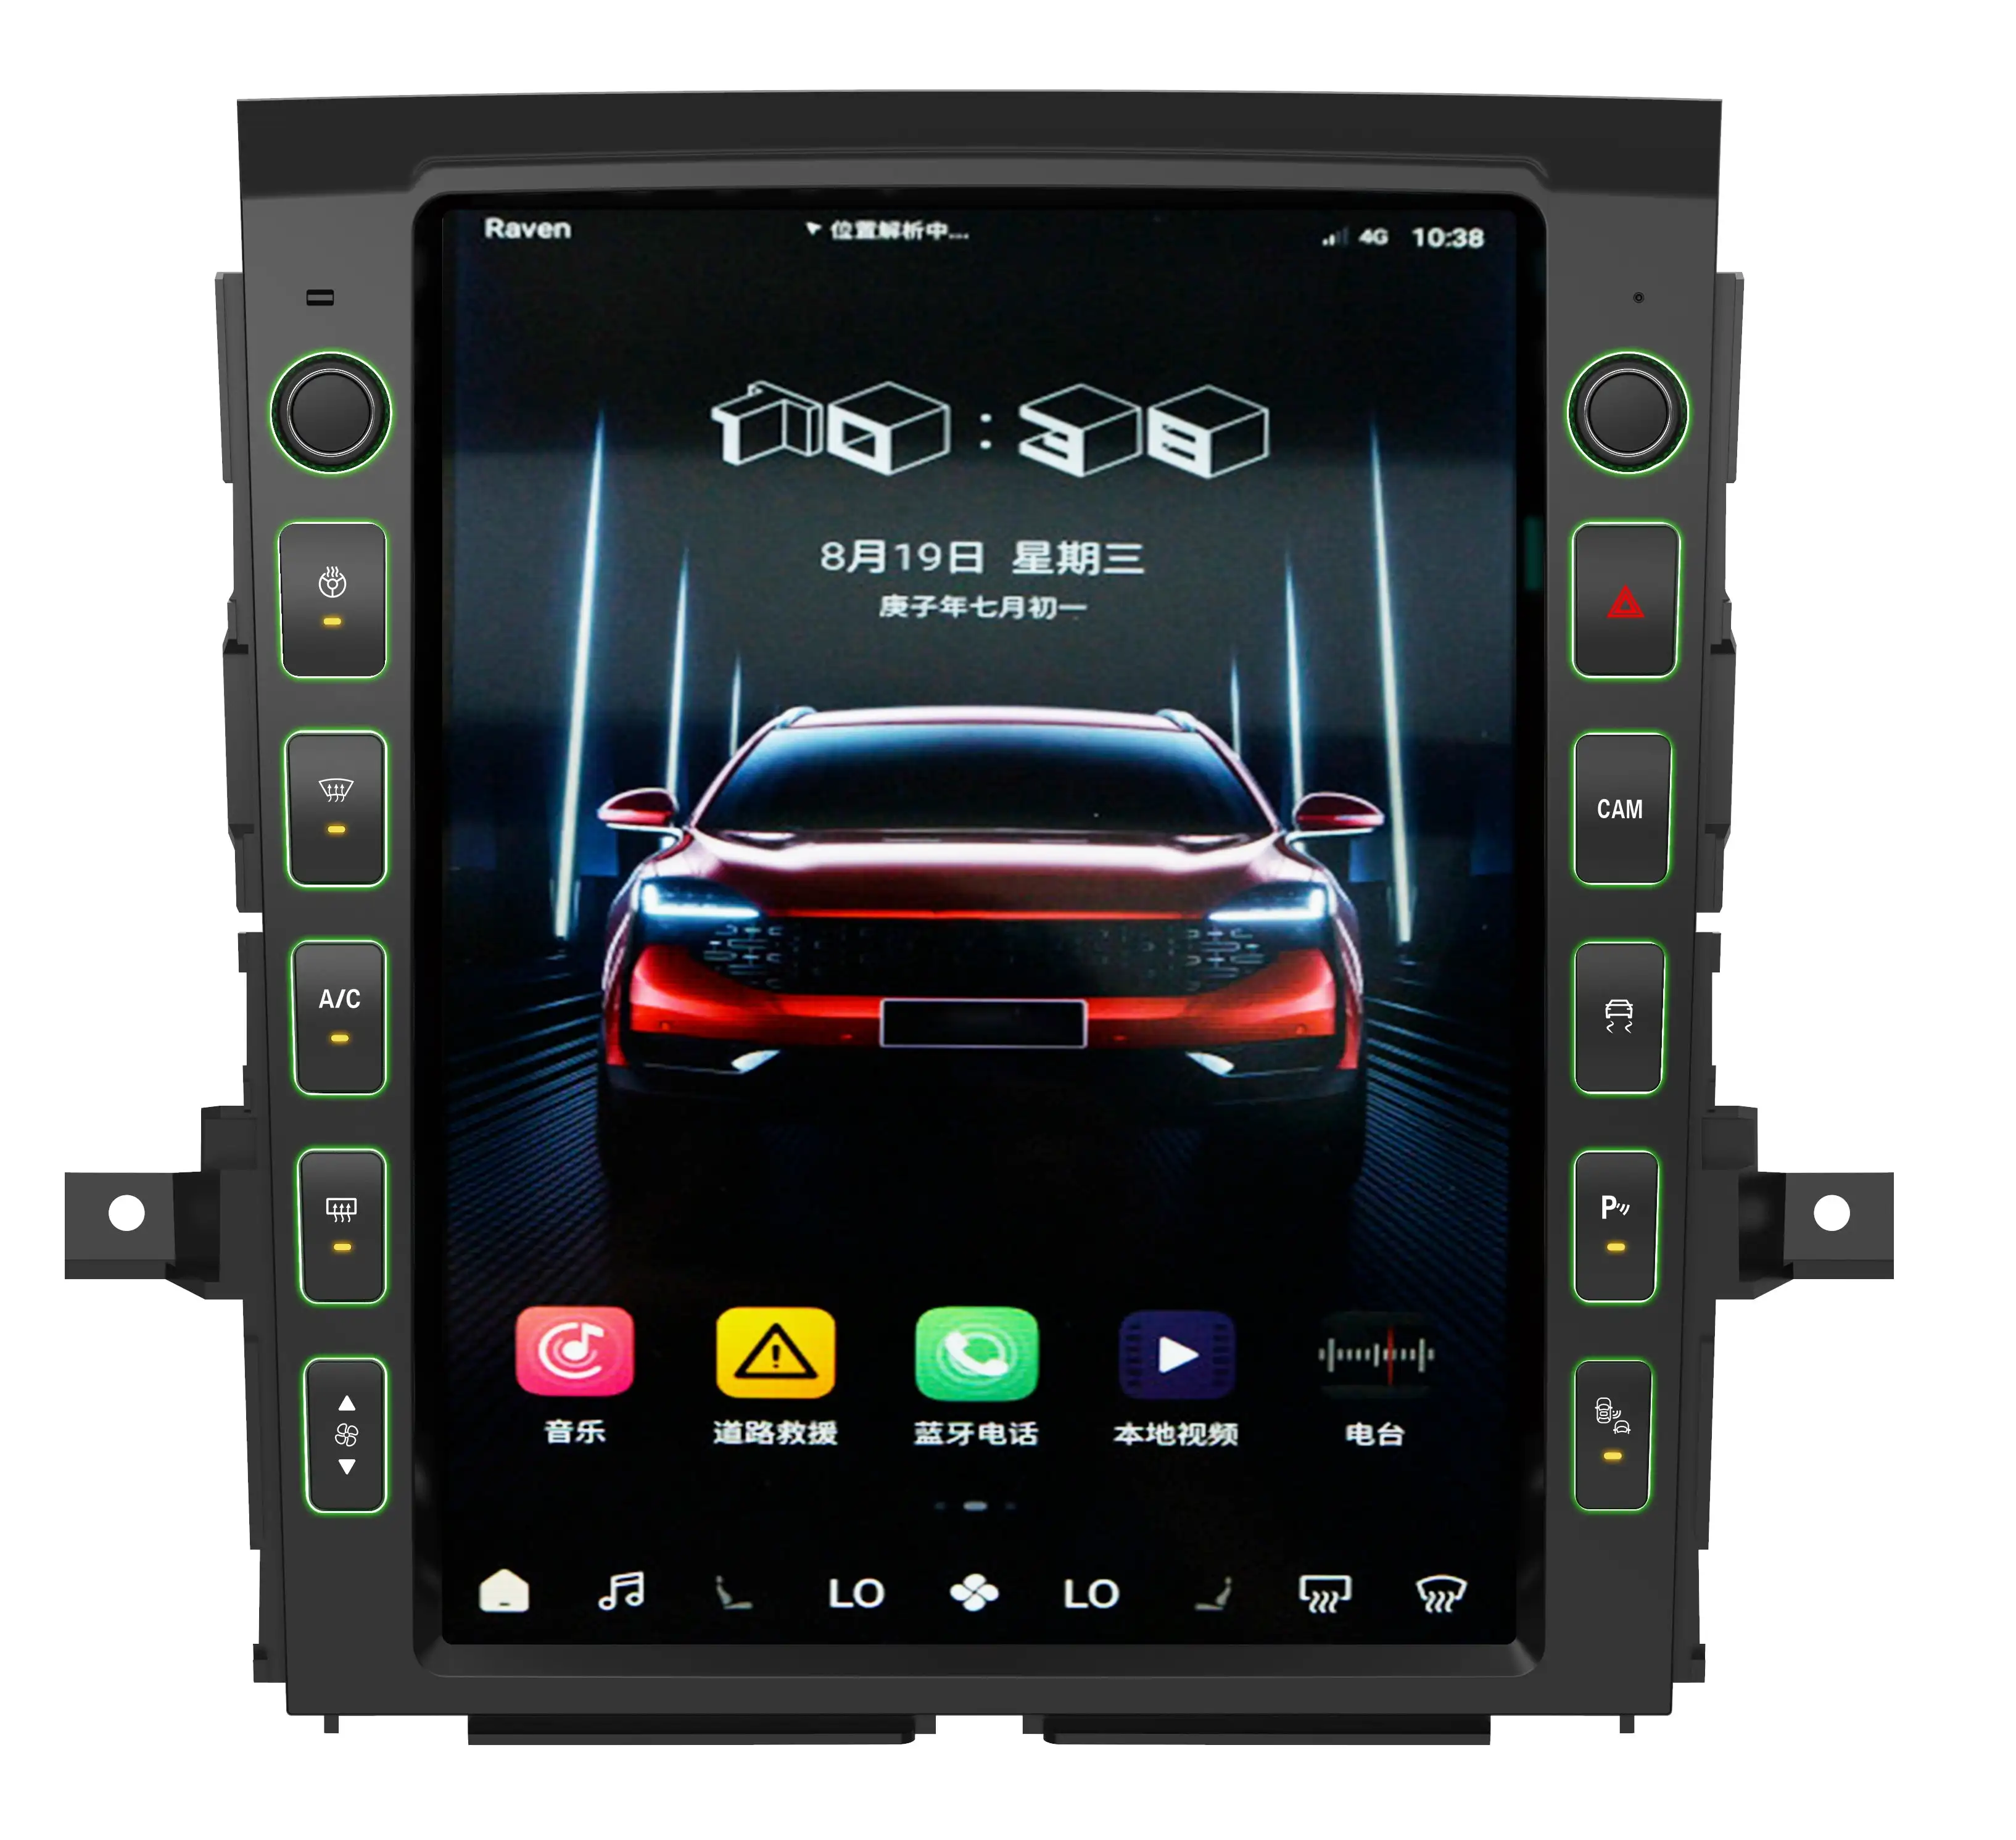 

PA 13'' Android 10 vertical touch screen car navigation Gps system For Niss Titan (XD) 2016 - 2019 car radio, Physical knobs and buttons, color customizable